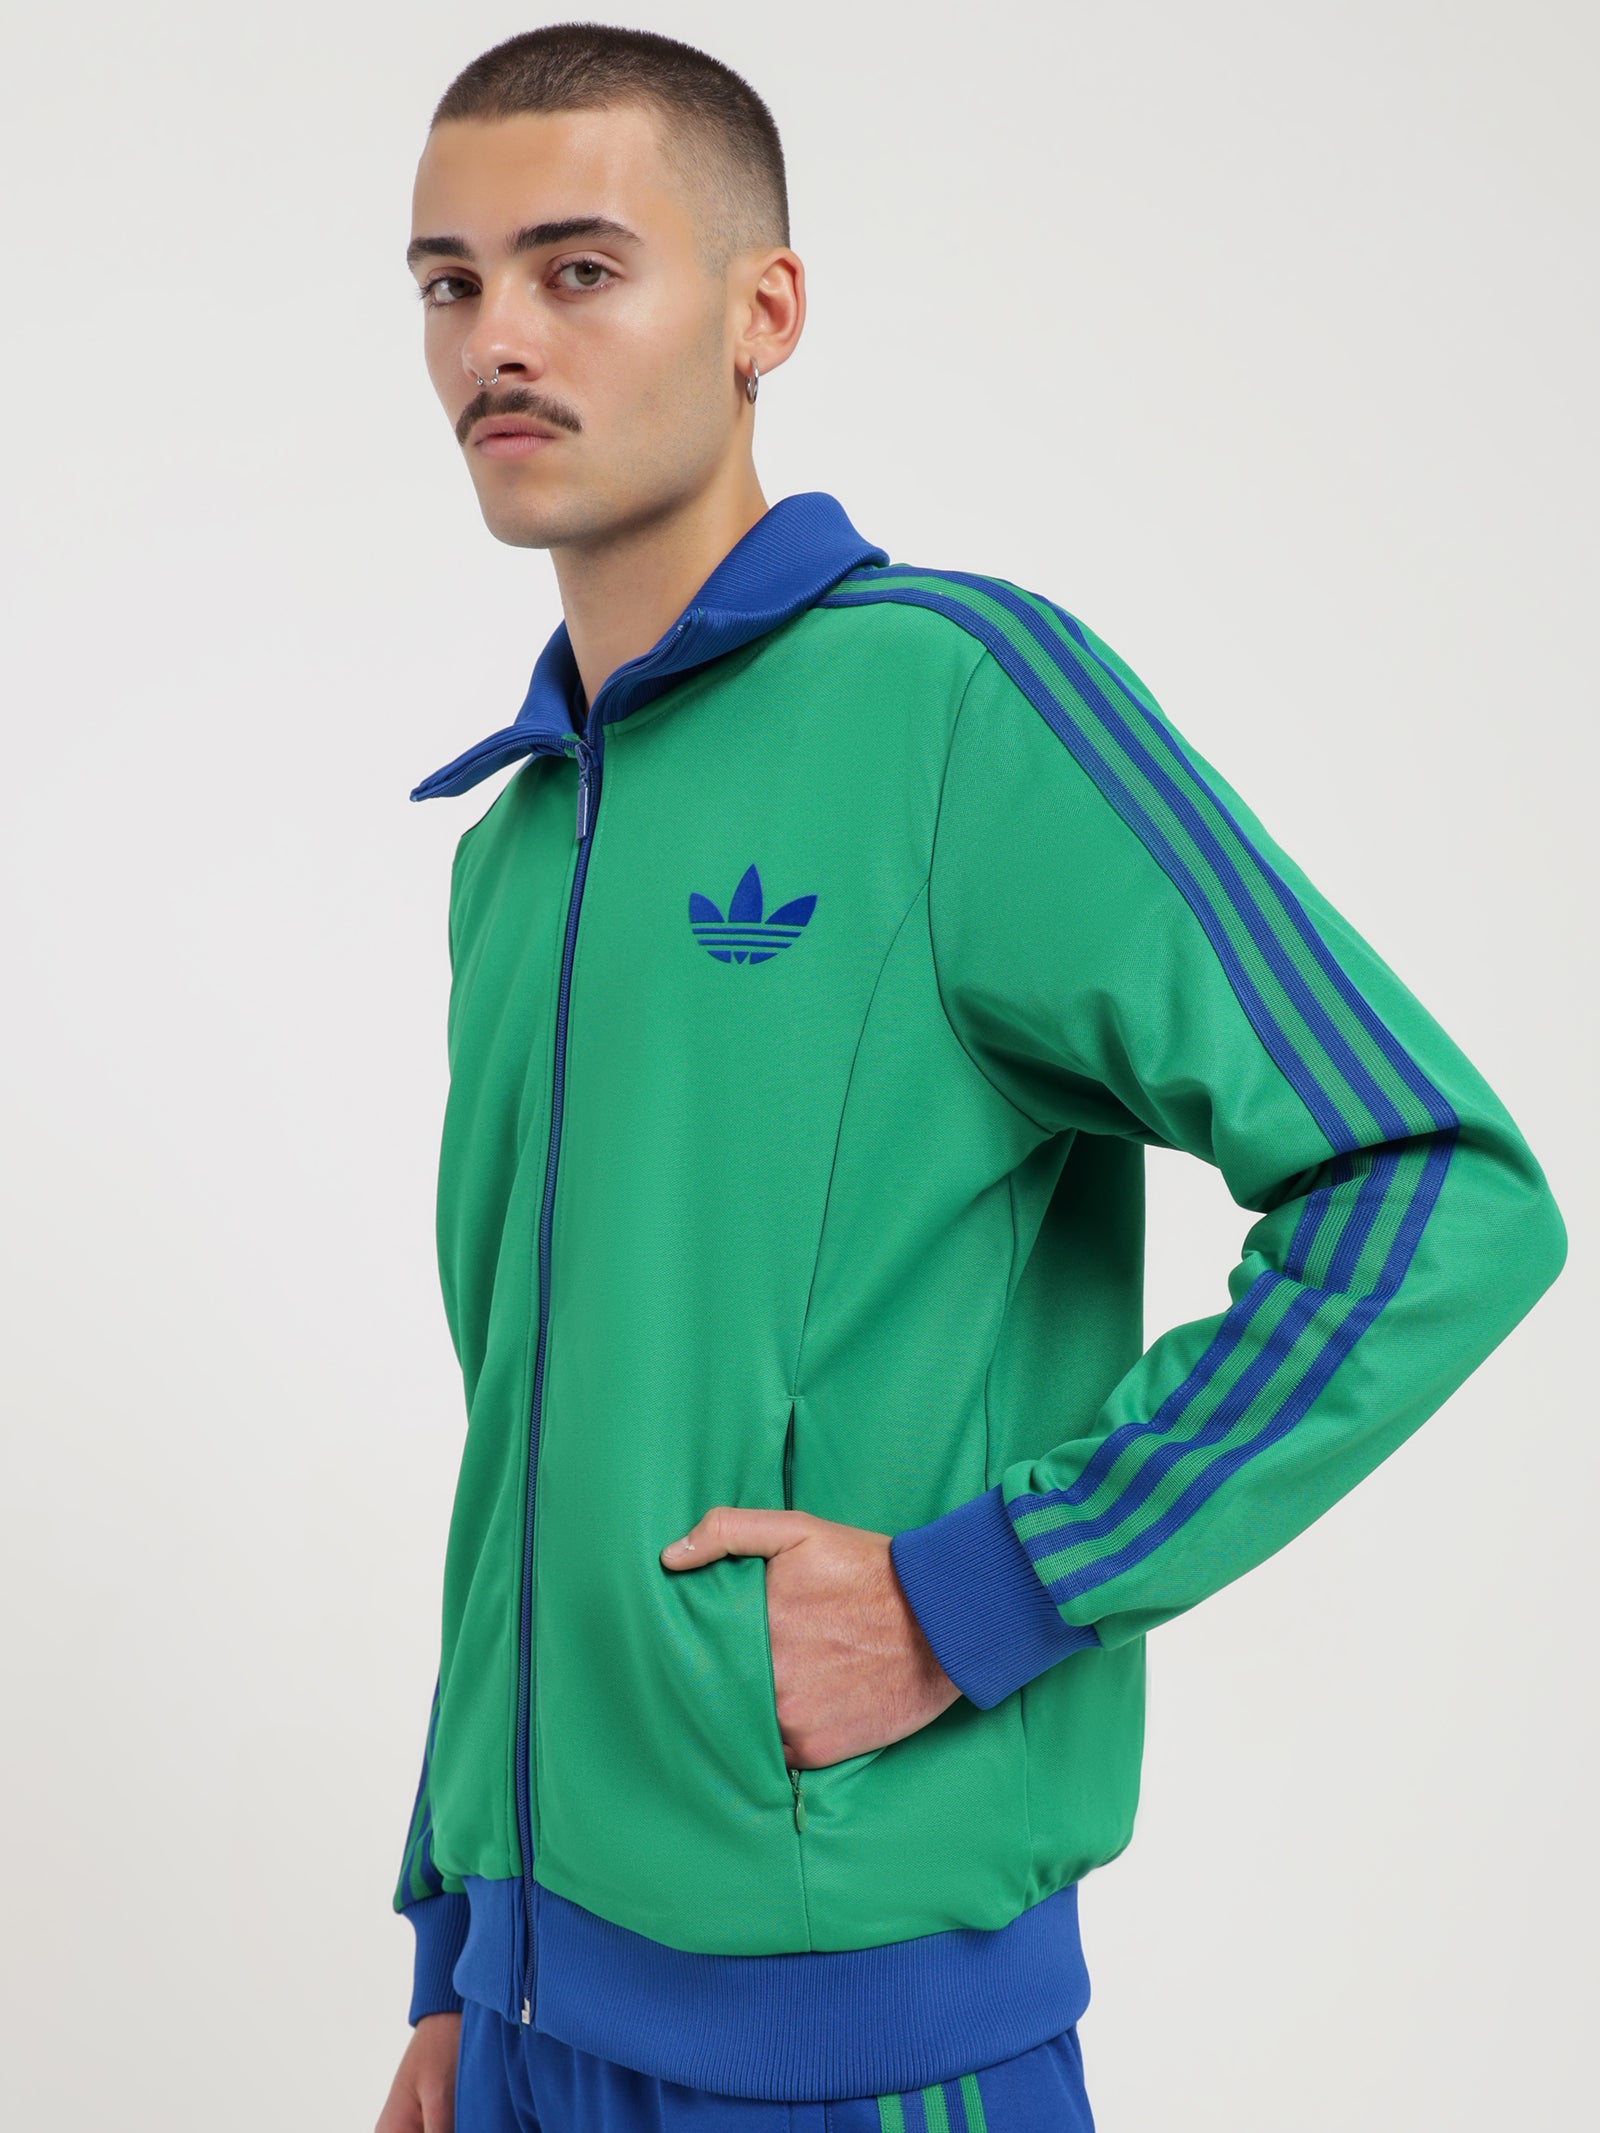 ADICOLOR 70s Heritage Now Striped Track Top in Green